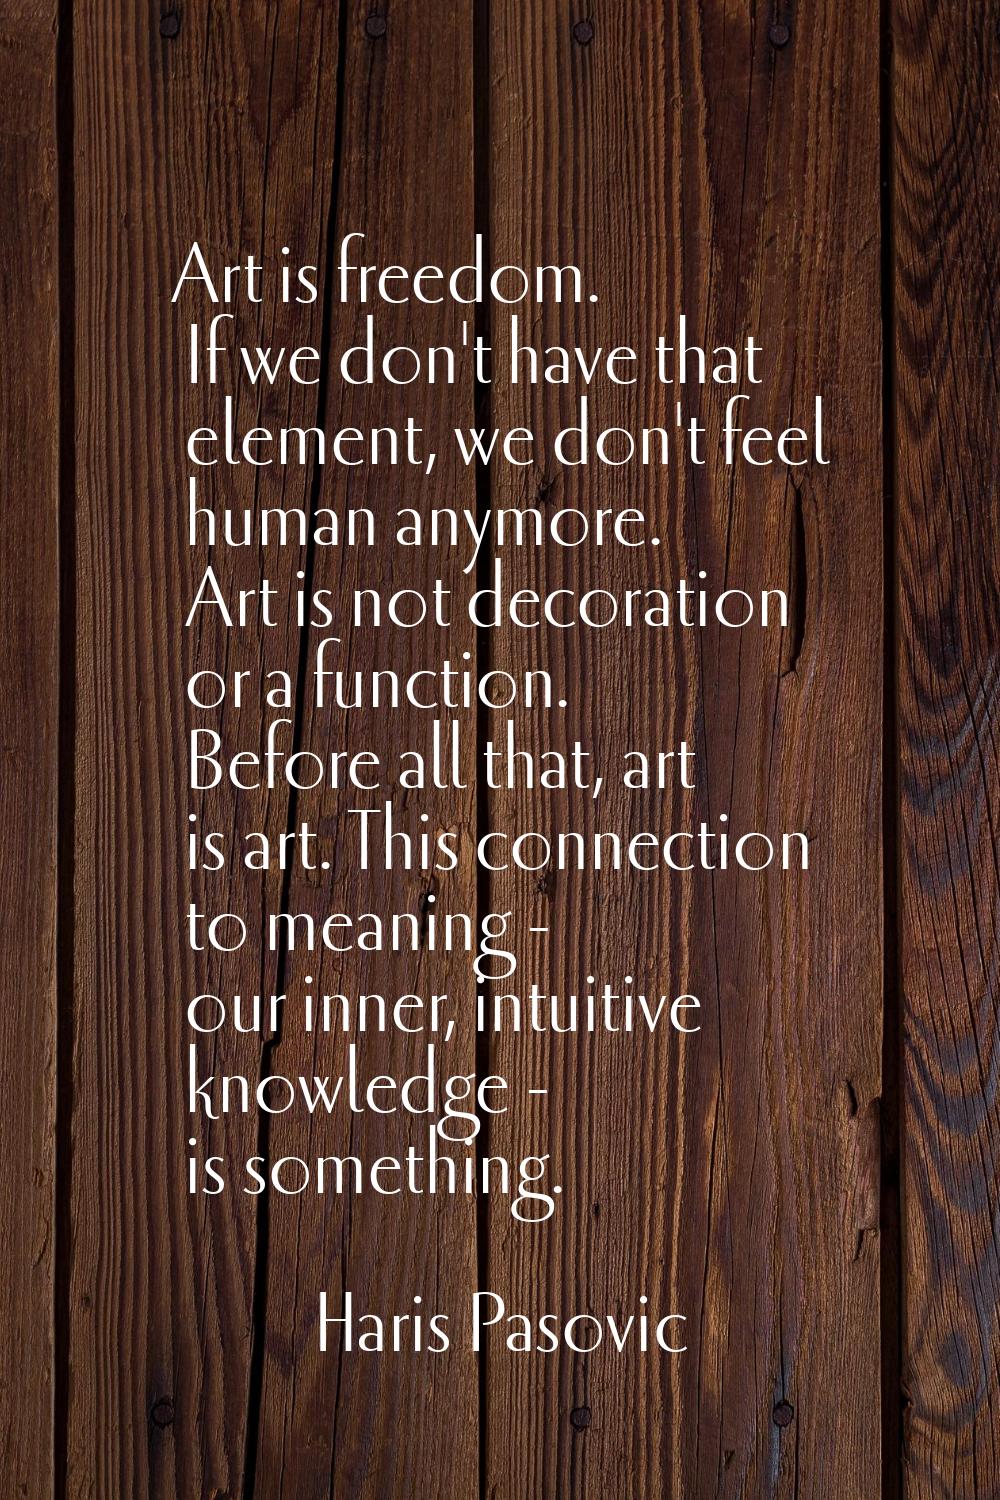 Art is freedom. If we don't have that element, we don't feel human anymore. Art is not decoration o